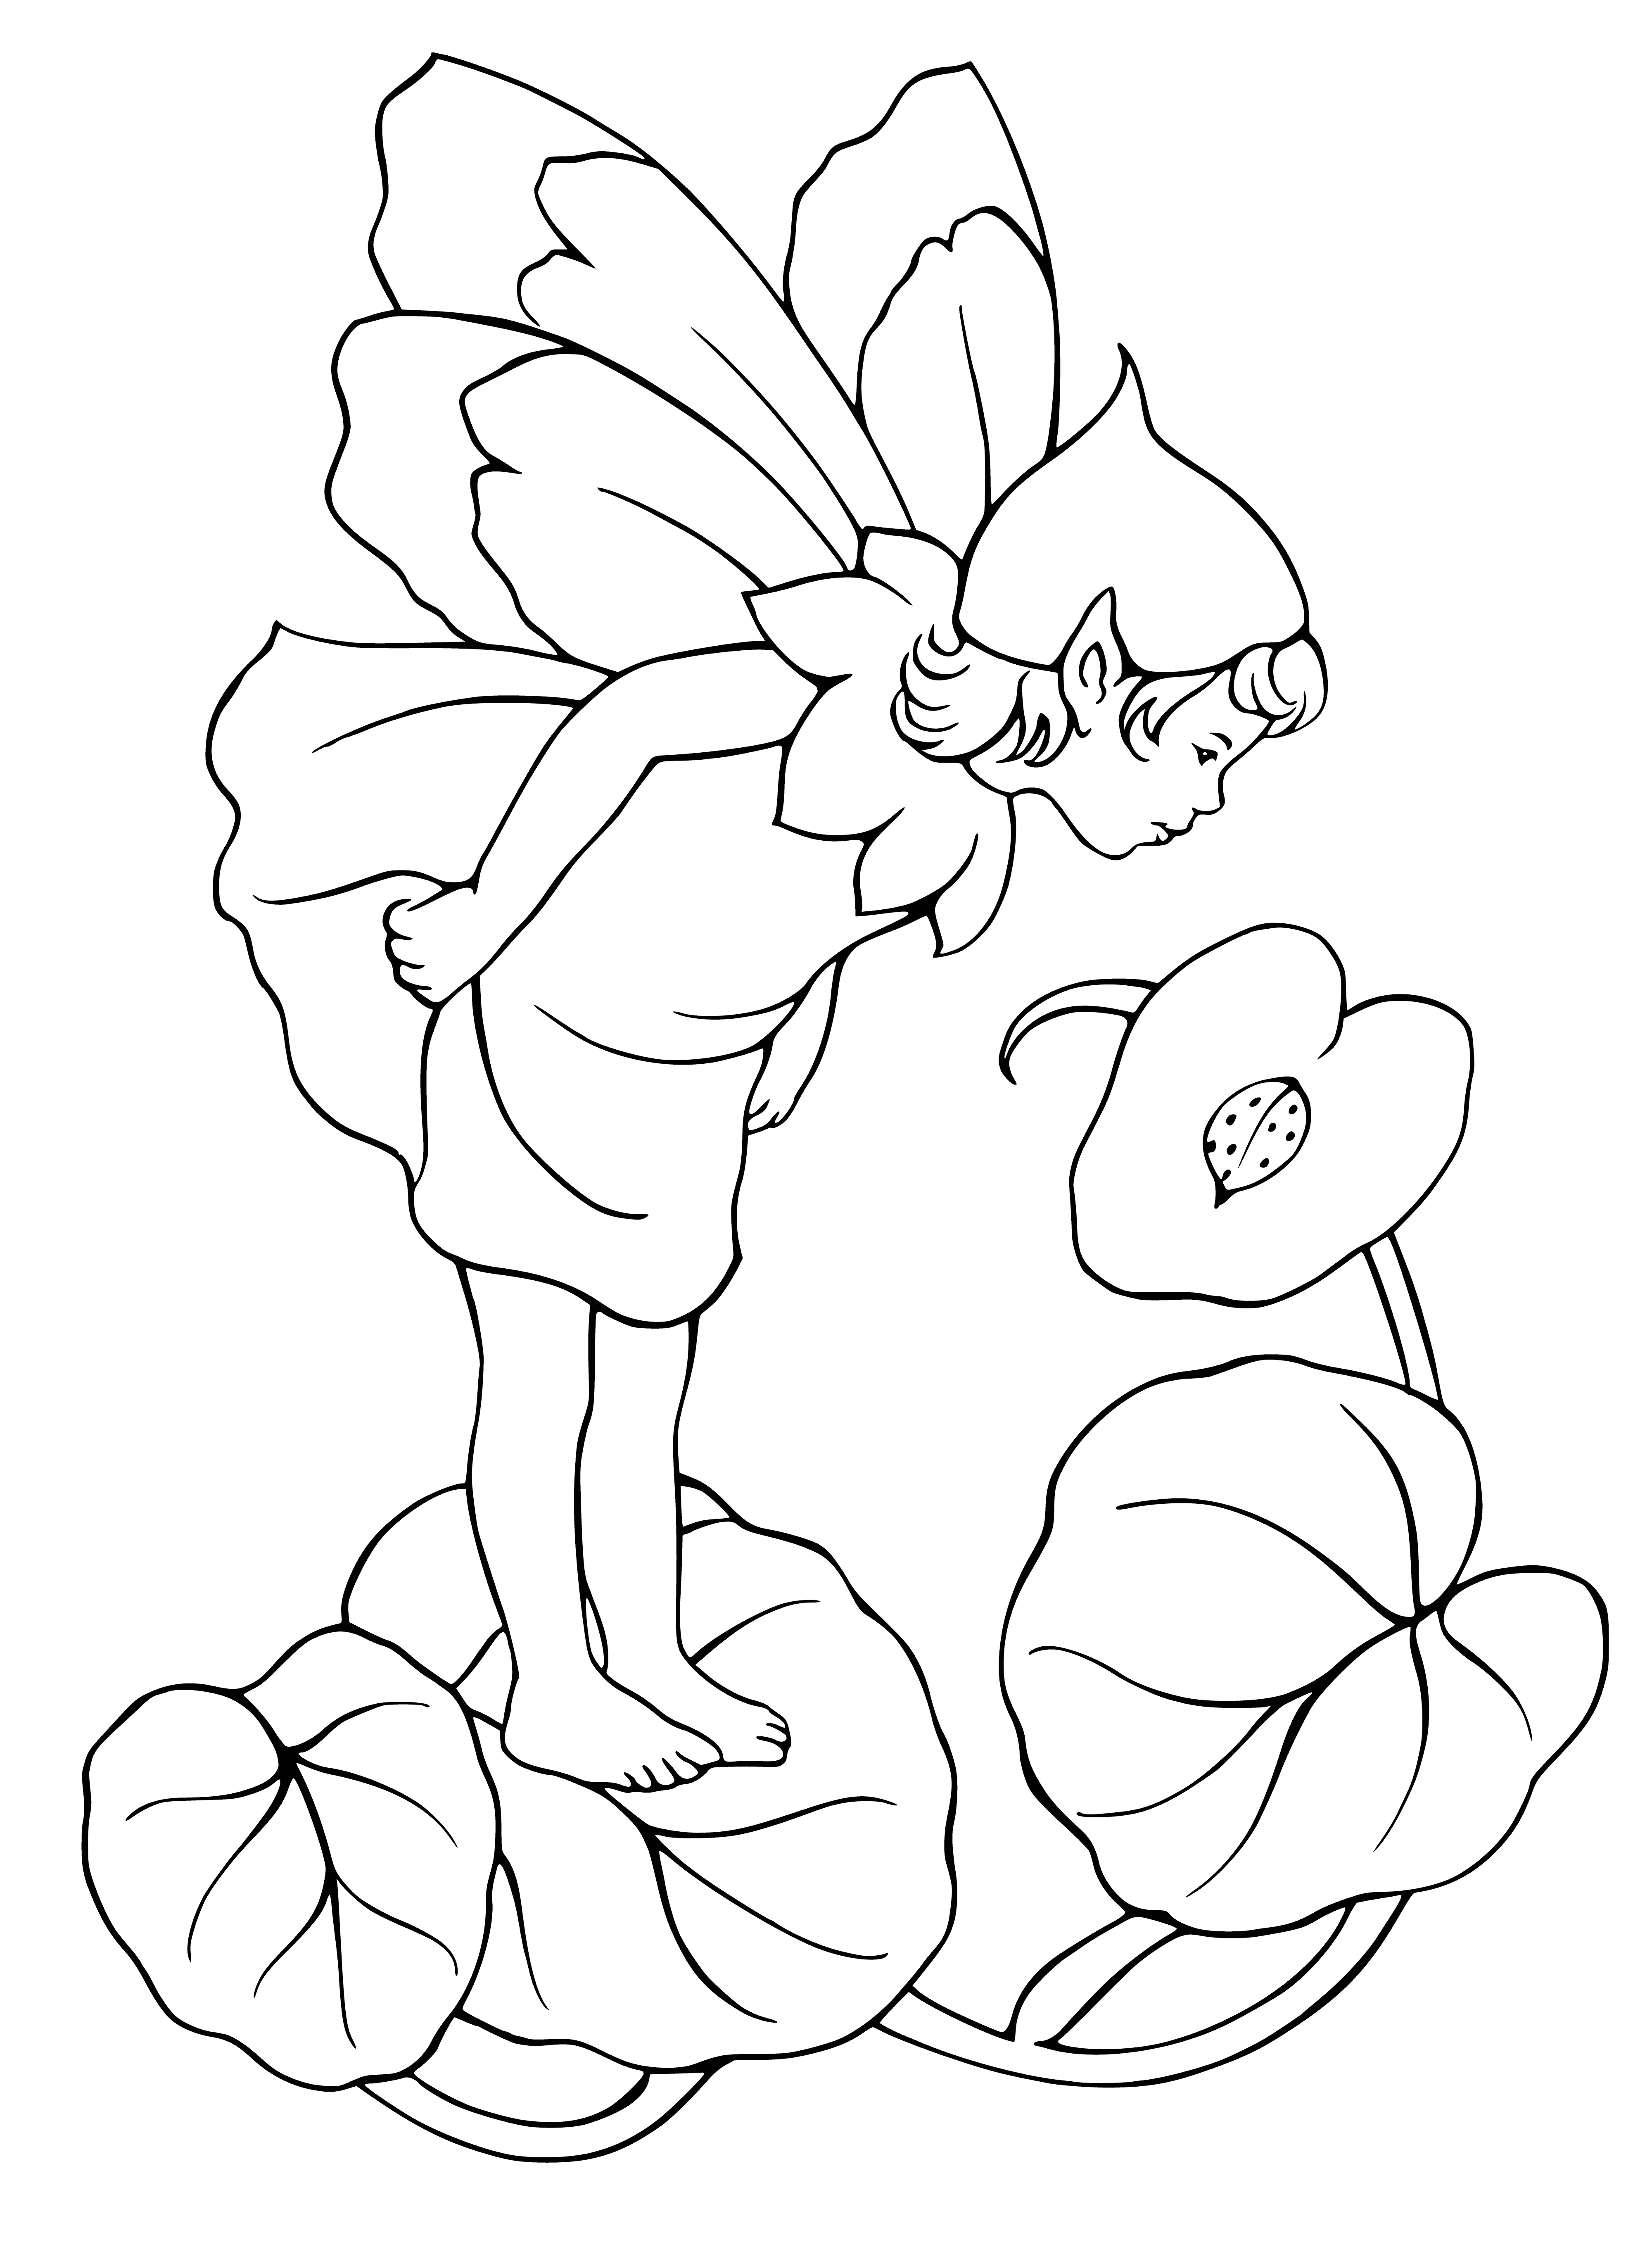 Little people coloring page